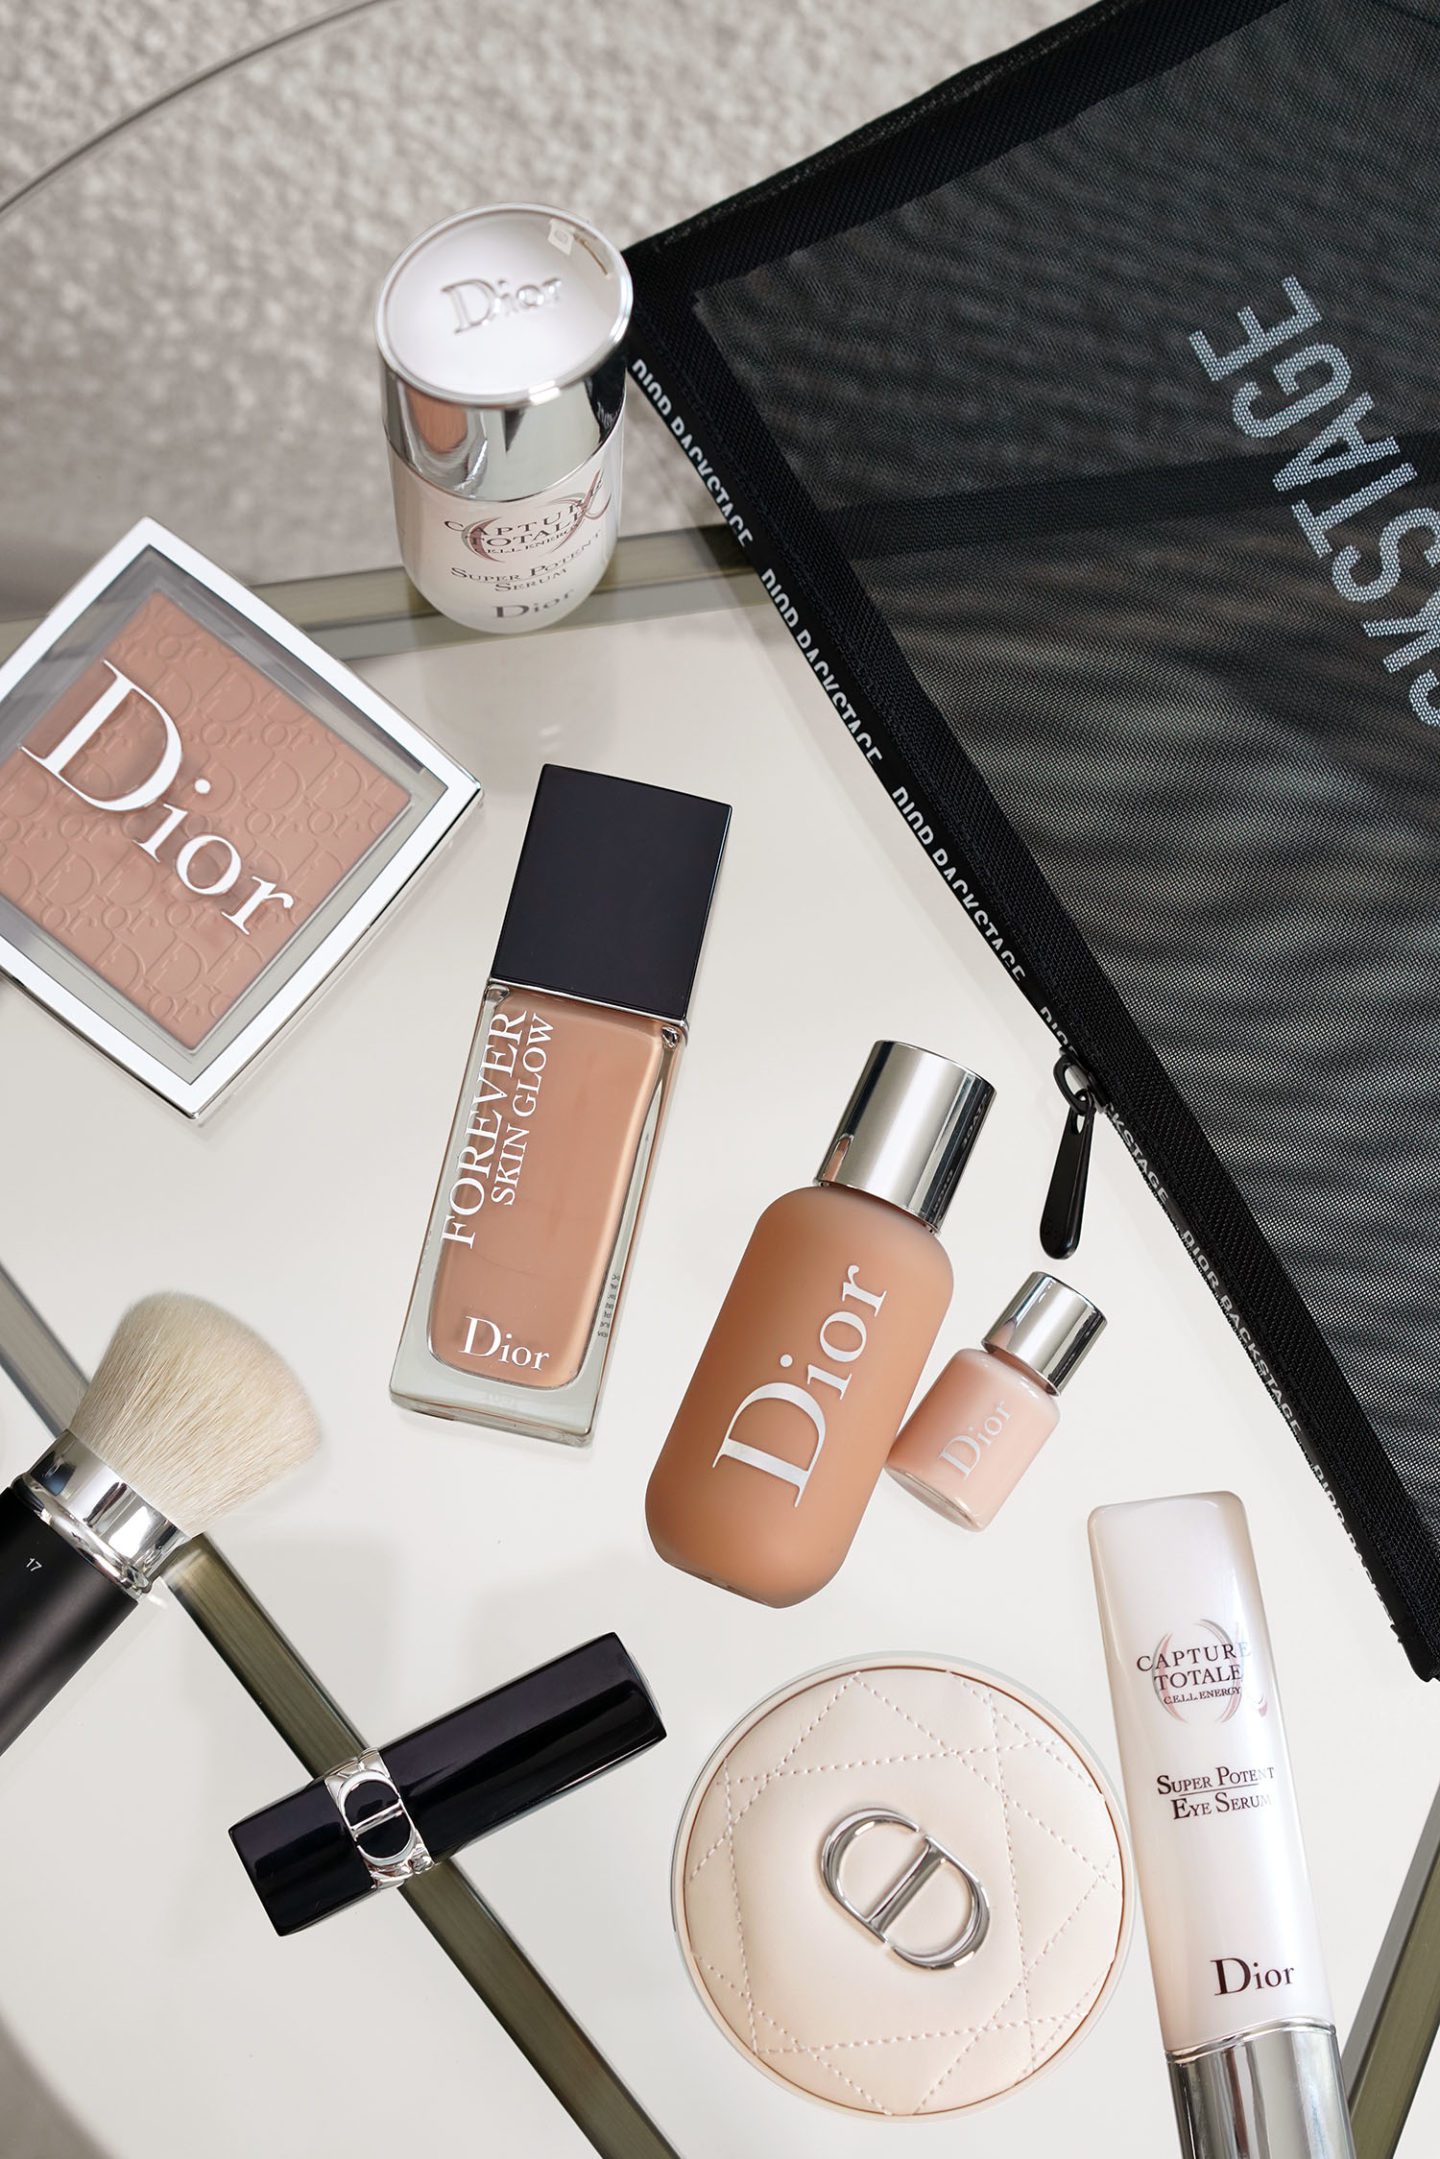 Dior Forever Skin Glow Foundation and Backstage Face and Body 3N